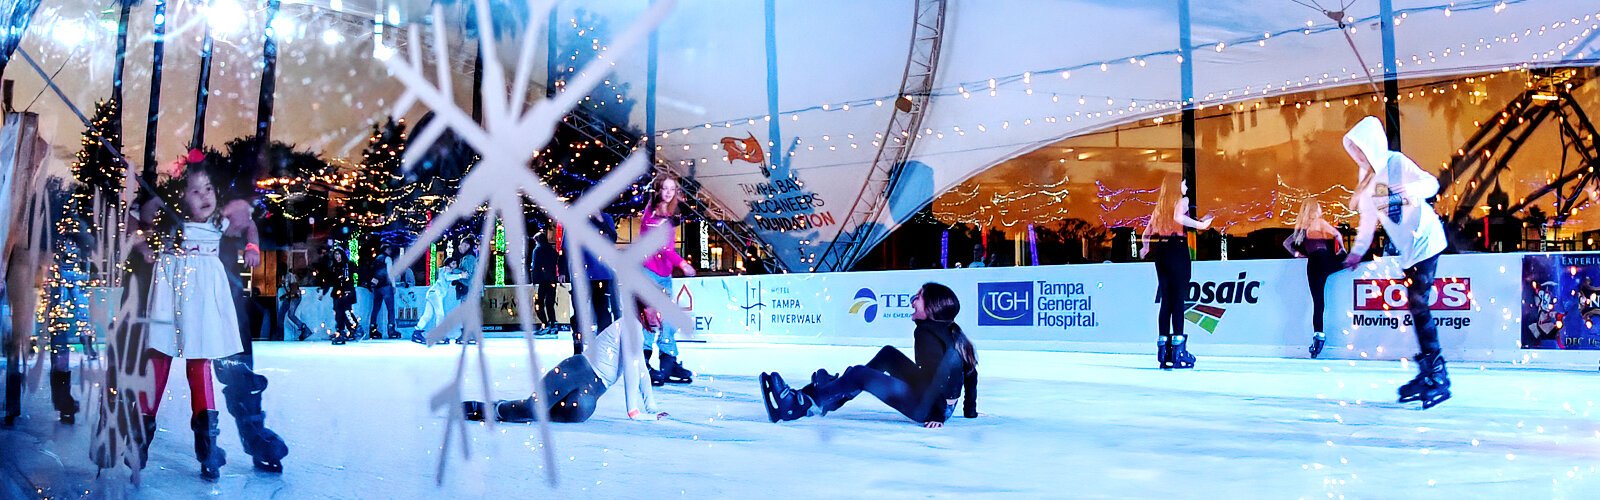  A novice skater's fall on the Winter Village ice skating rink brings out laughter.